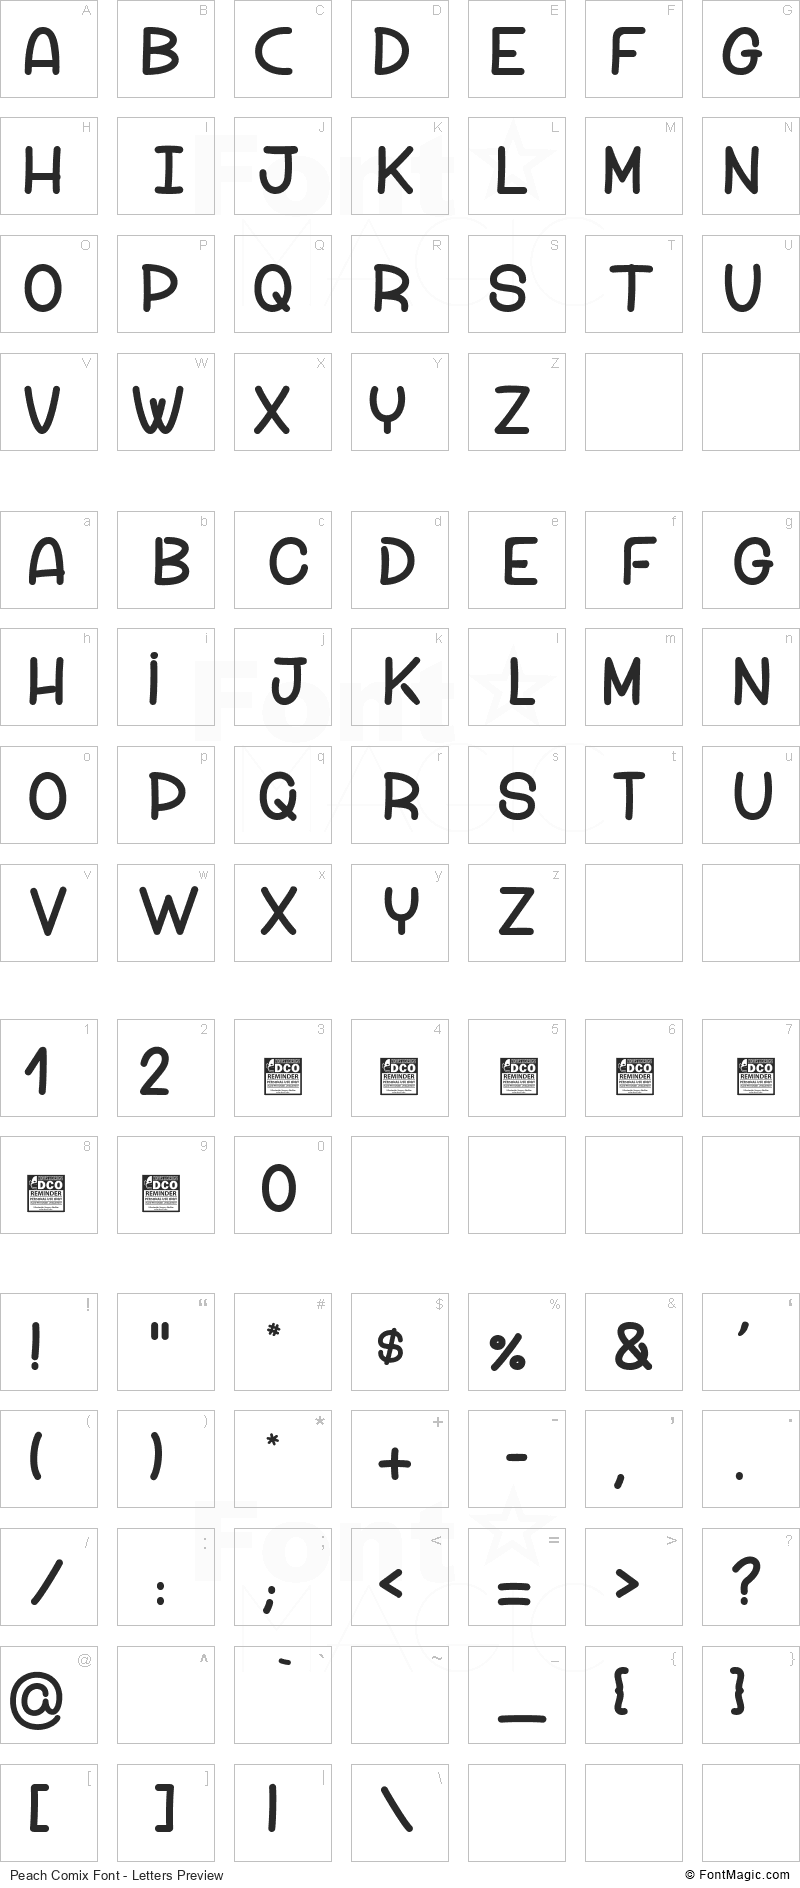 Peach Comix Font - All Latters Preview Chart